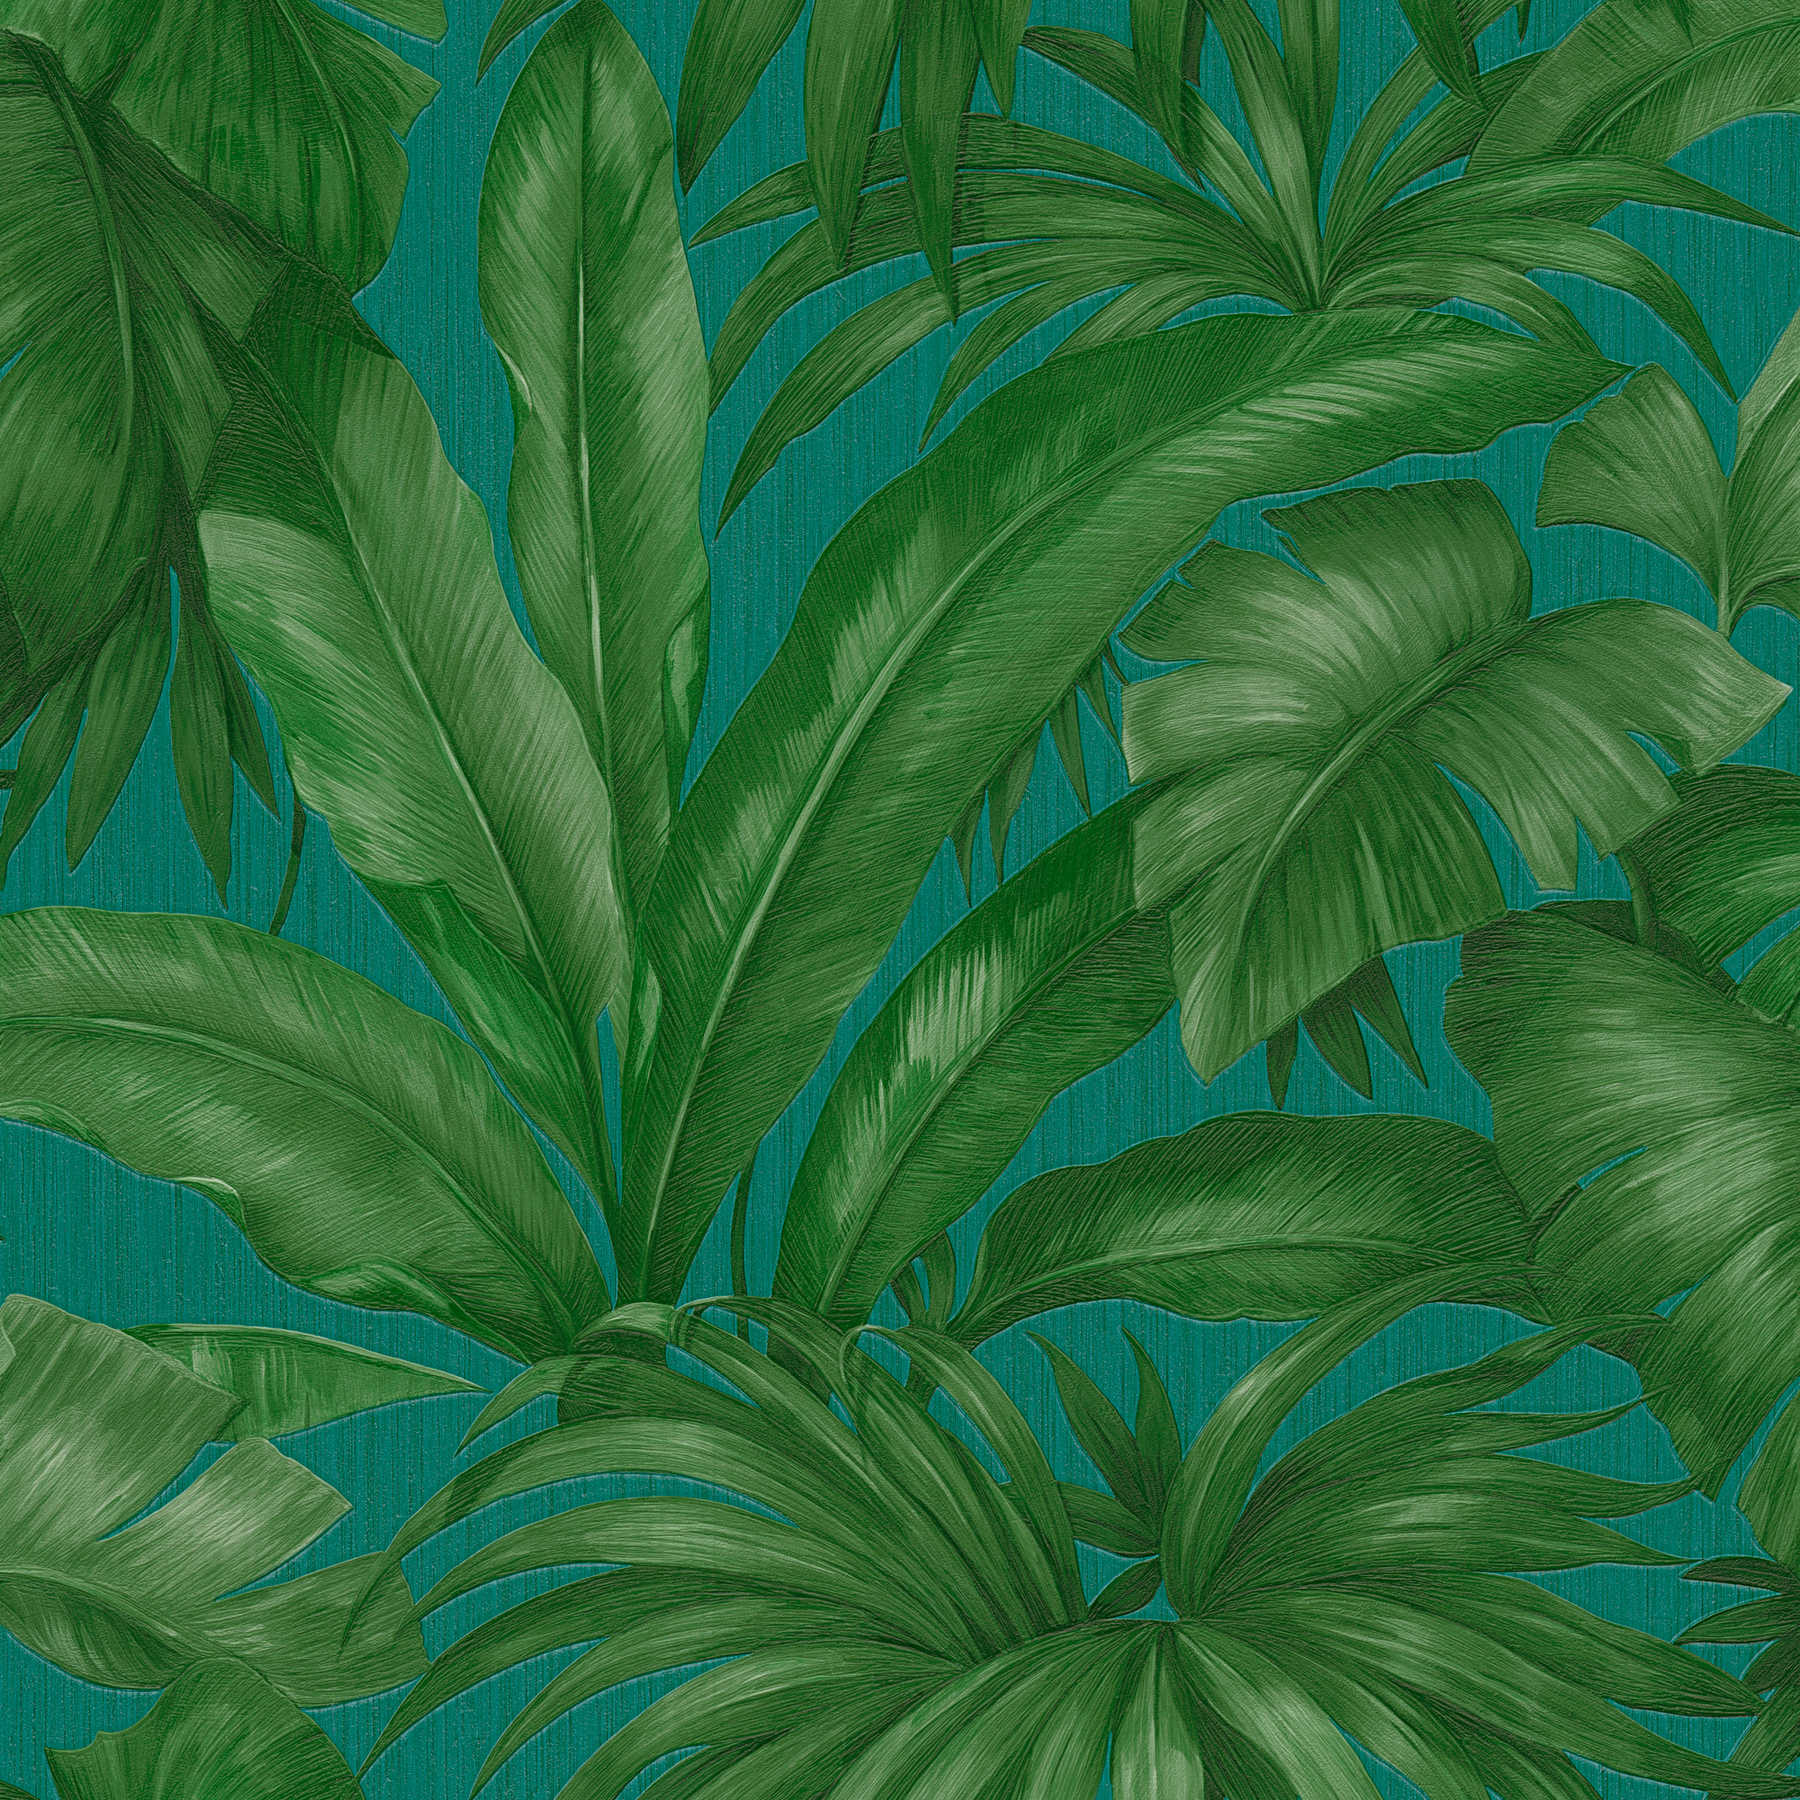 Jungle wallpaper VERSACE with palm leaves motif - green
